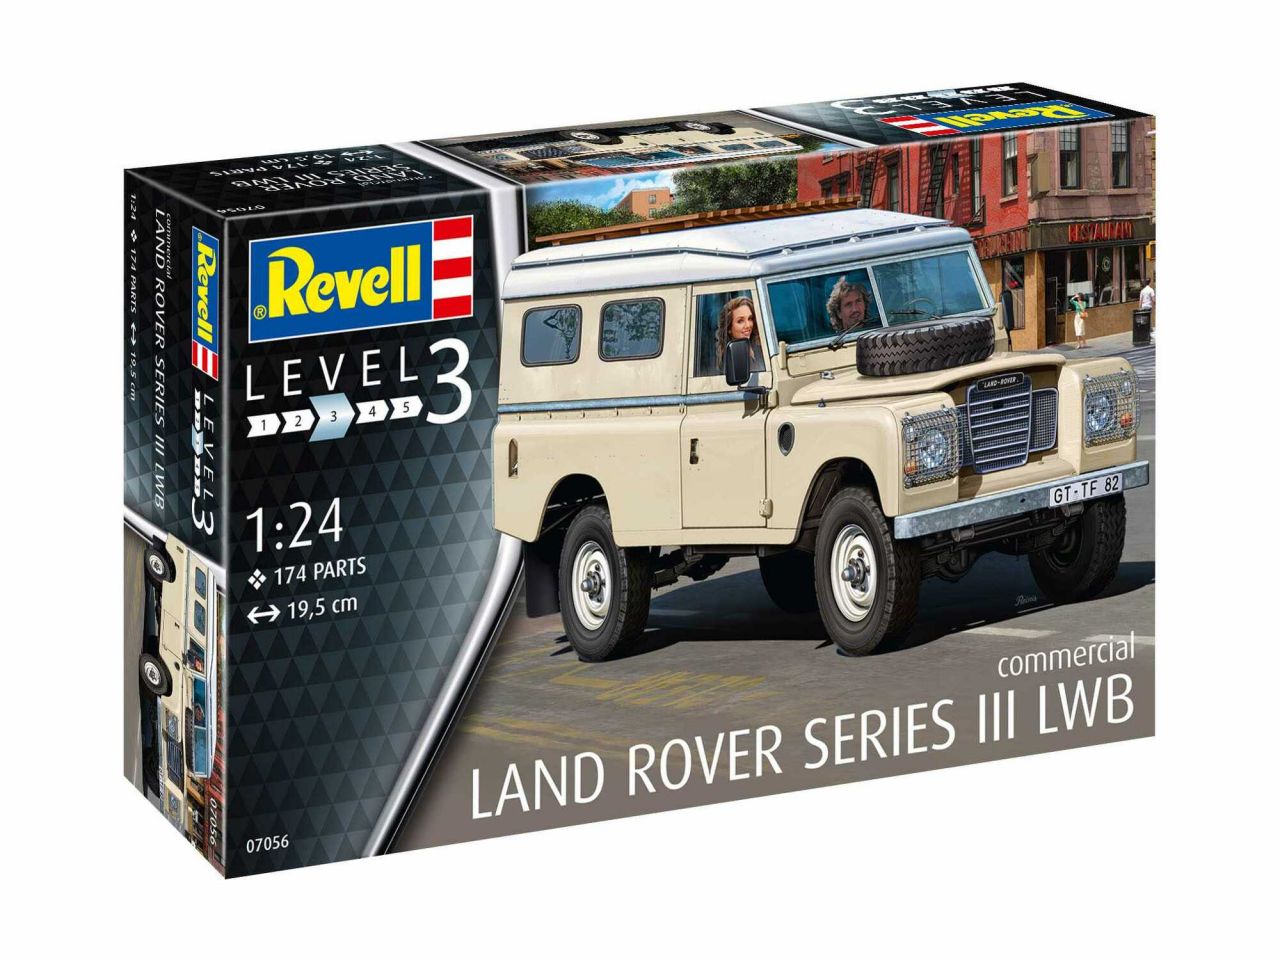 Revell 7056 Land Rover Series III LWB